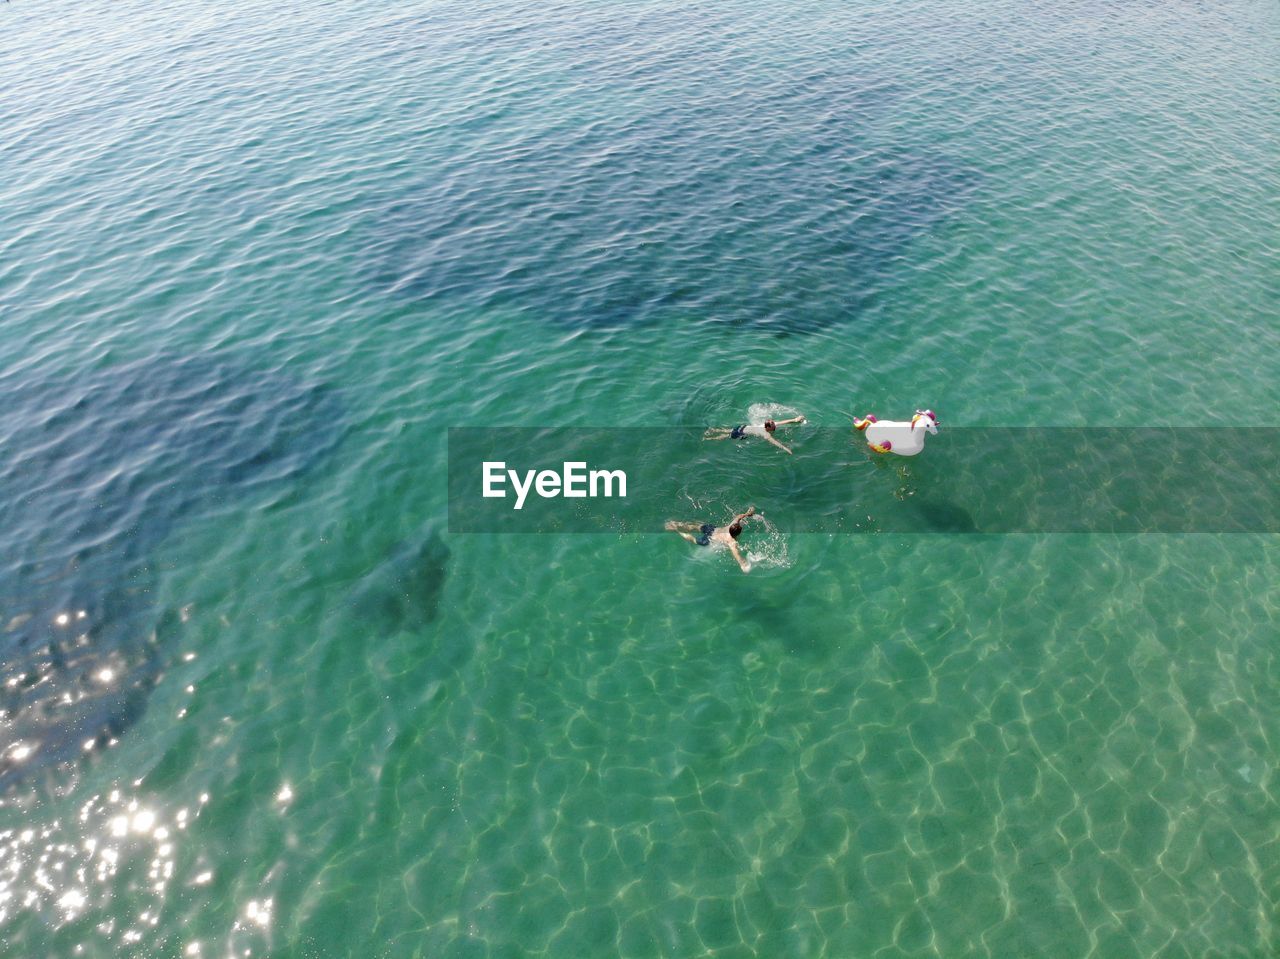 HIGH ANGLE VIEW OF TWO PEOPLE SWIMMING IN SEA